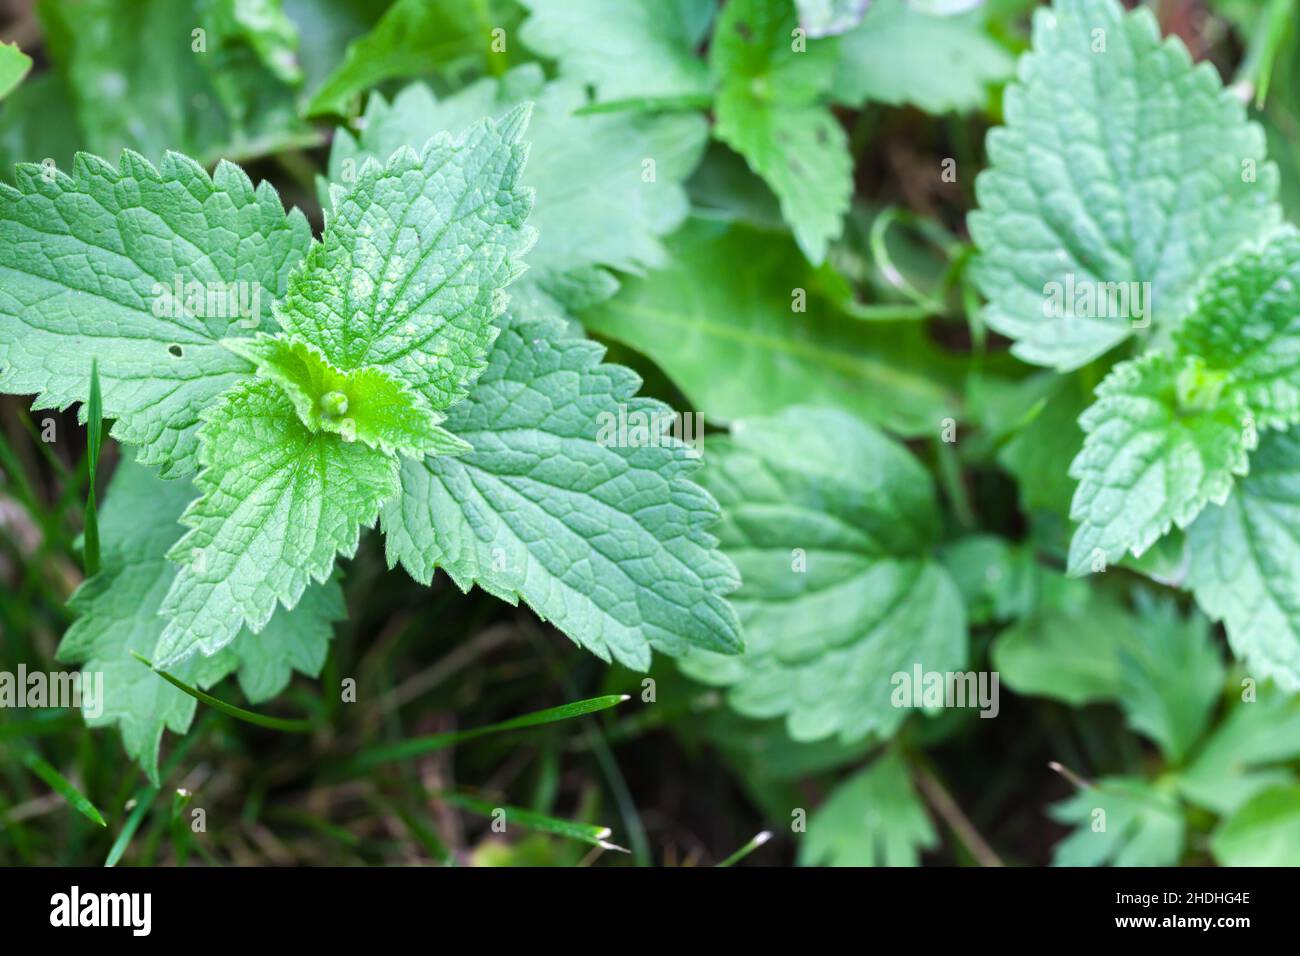 Green leaves of the Urtica, nettles or stinging nettles, close up photo Stock Photo